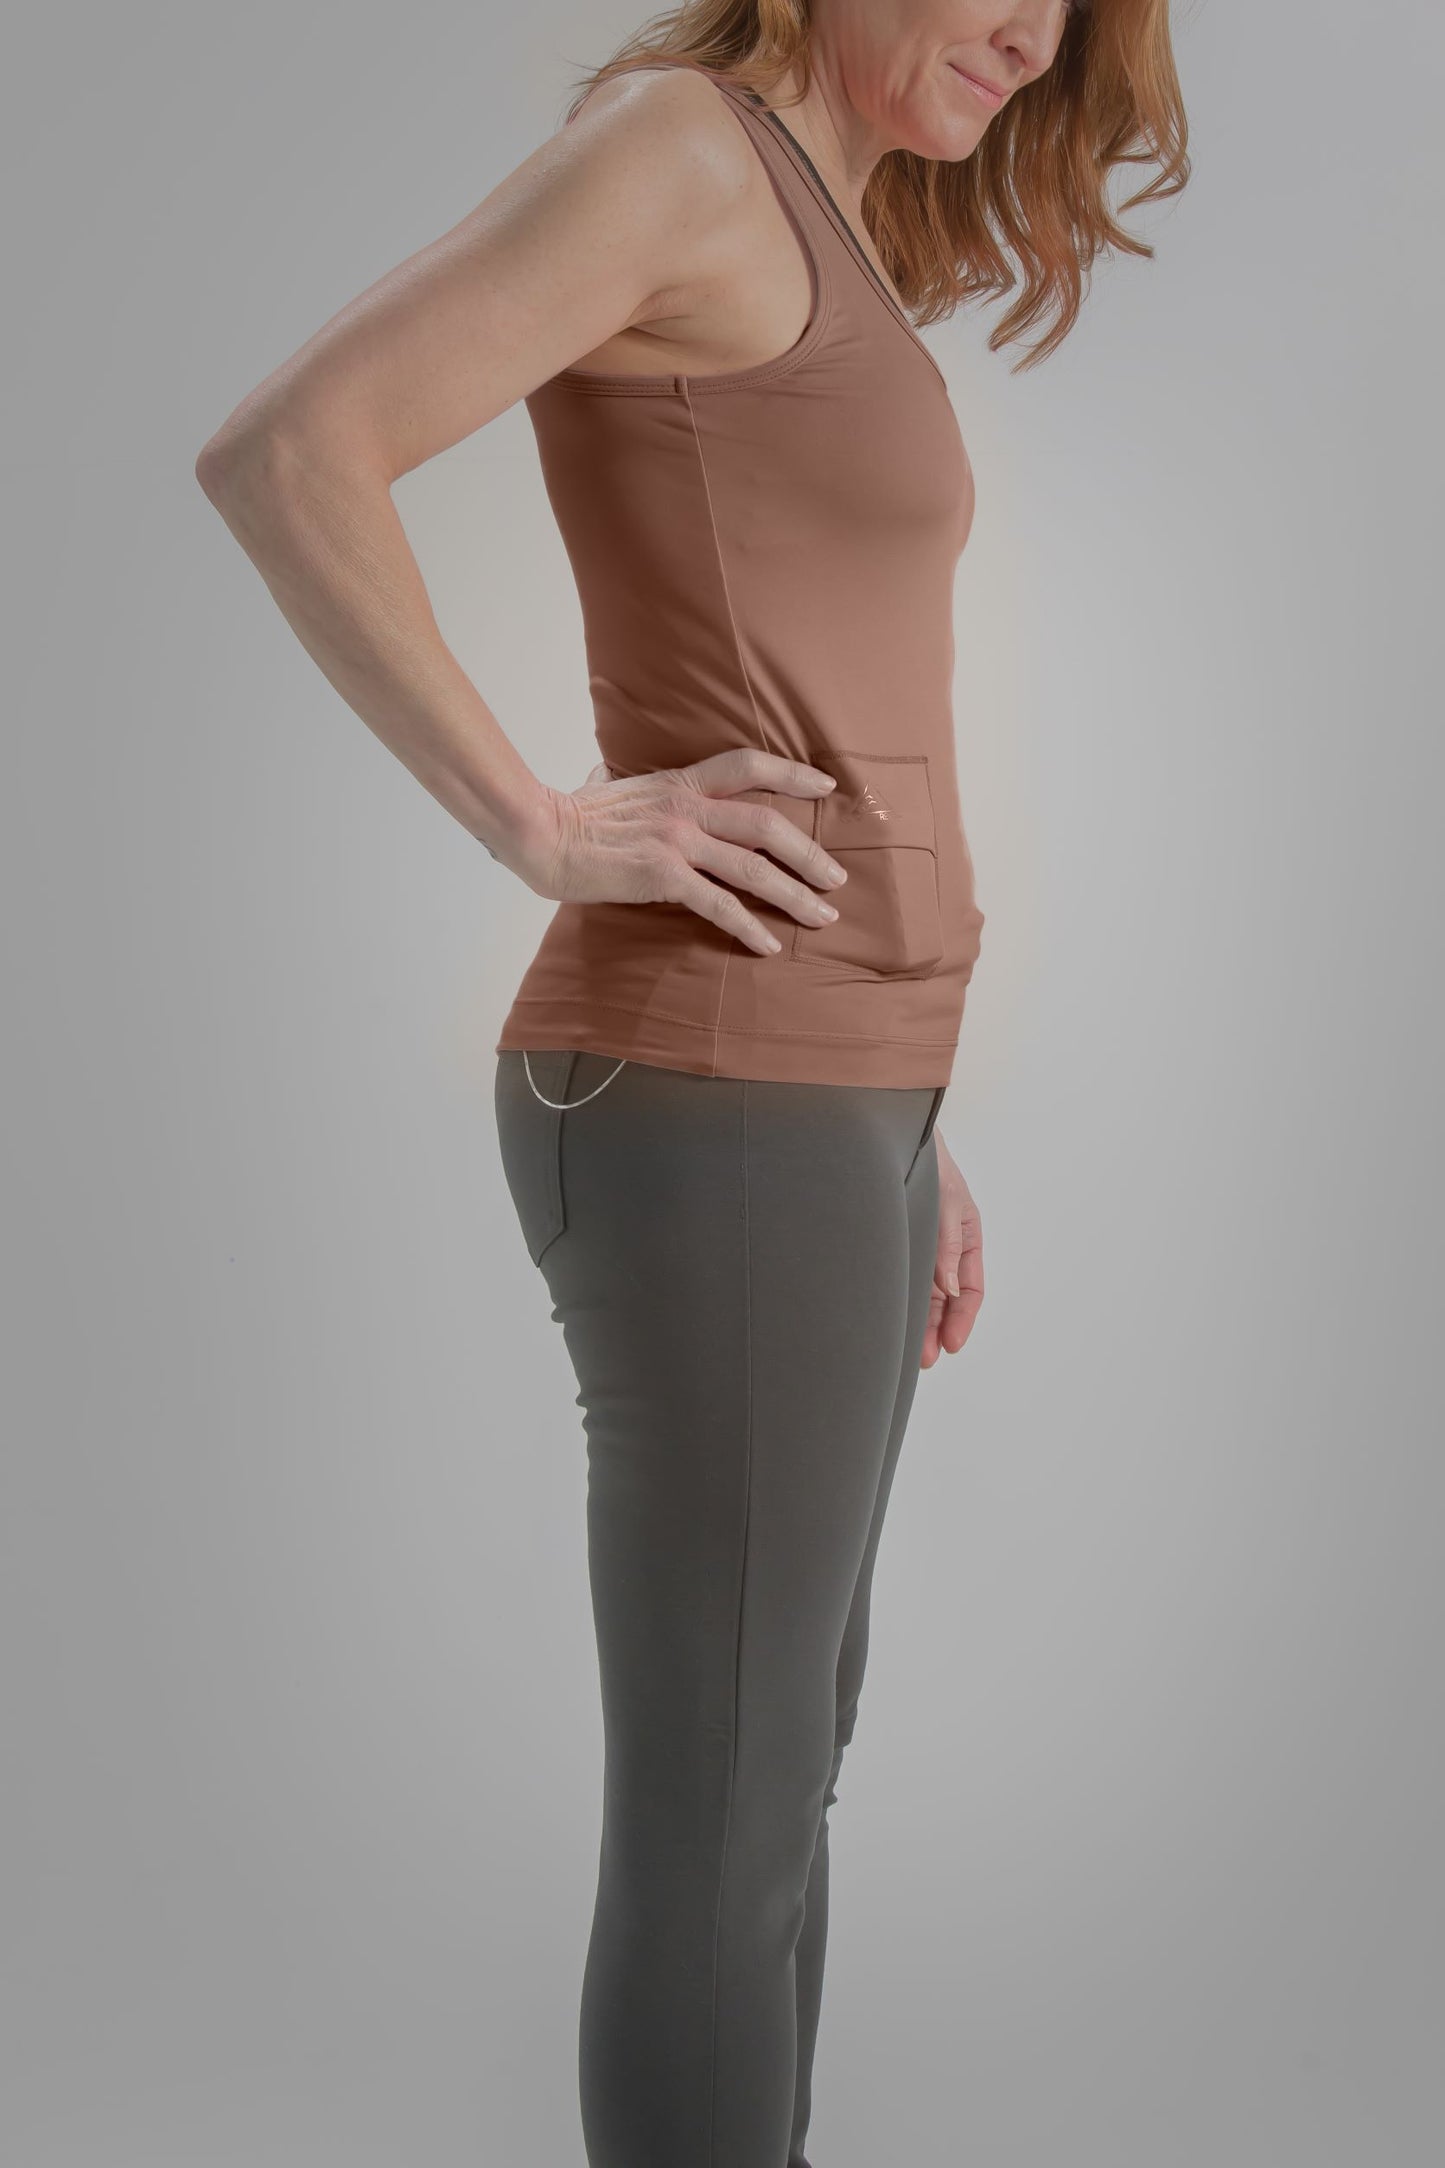 Women's Activewear Scoop Neck Tank with Insulin Pump and Cell Phone Pockets